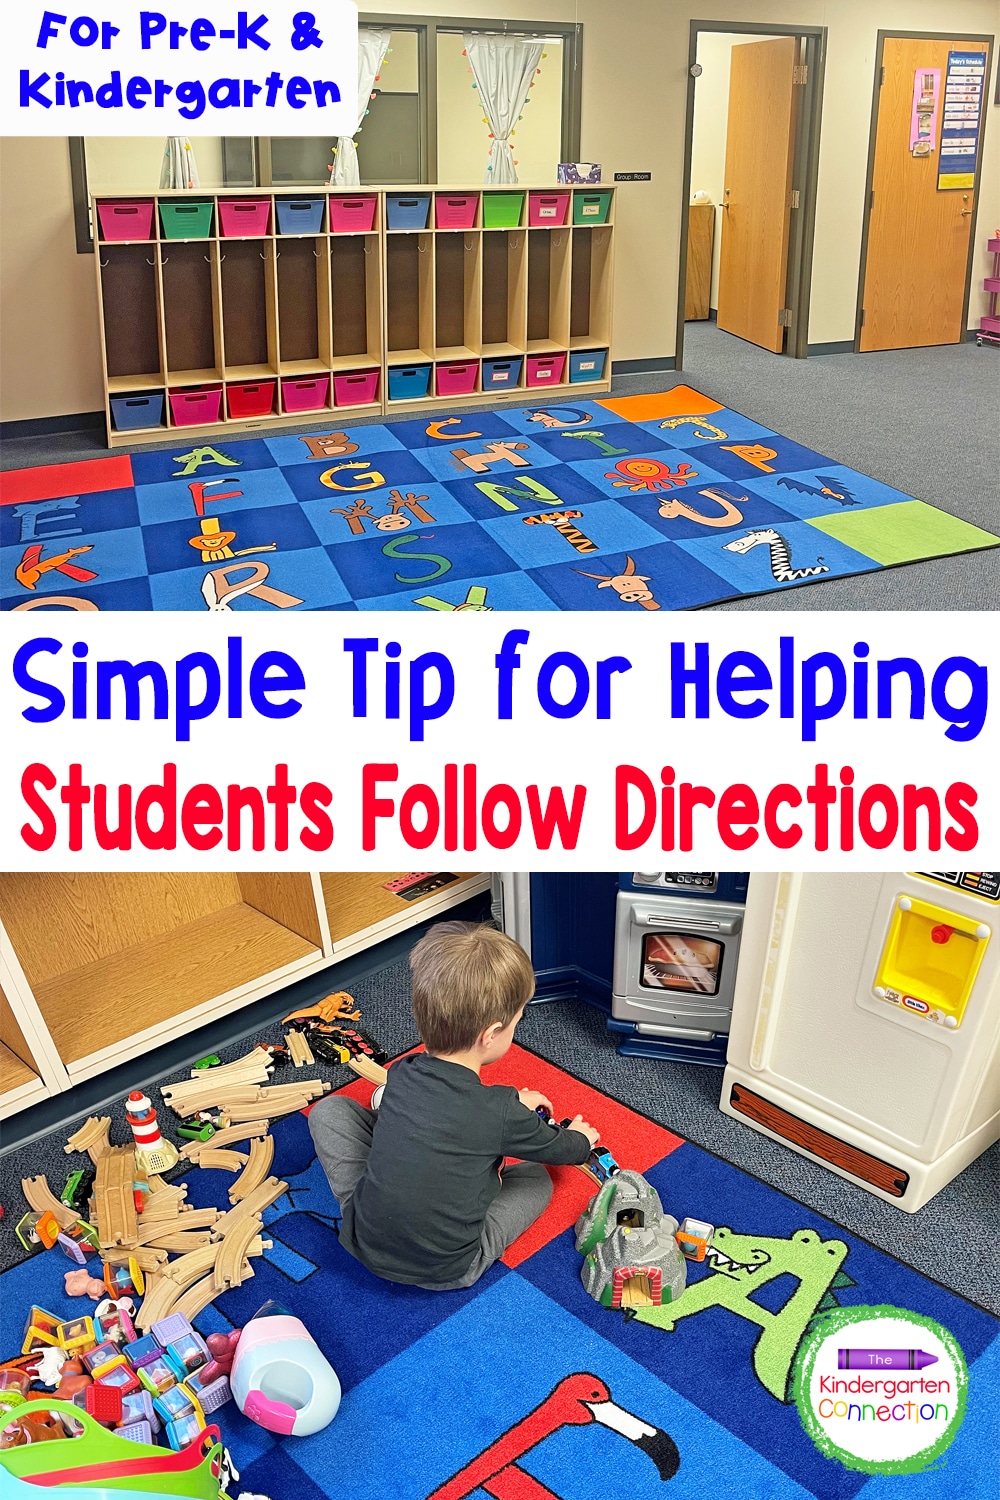 Simple Tip for Helping Students Follow Directions